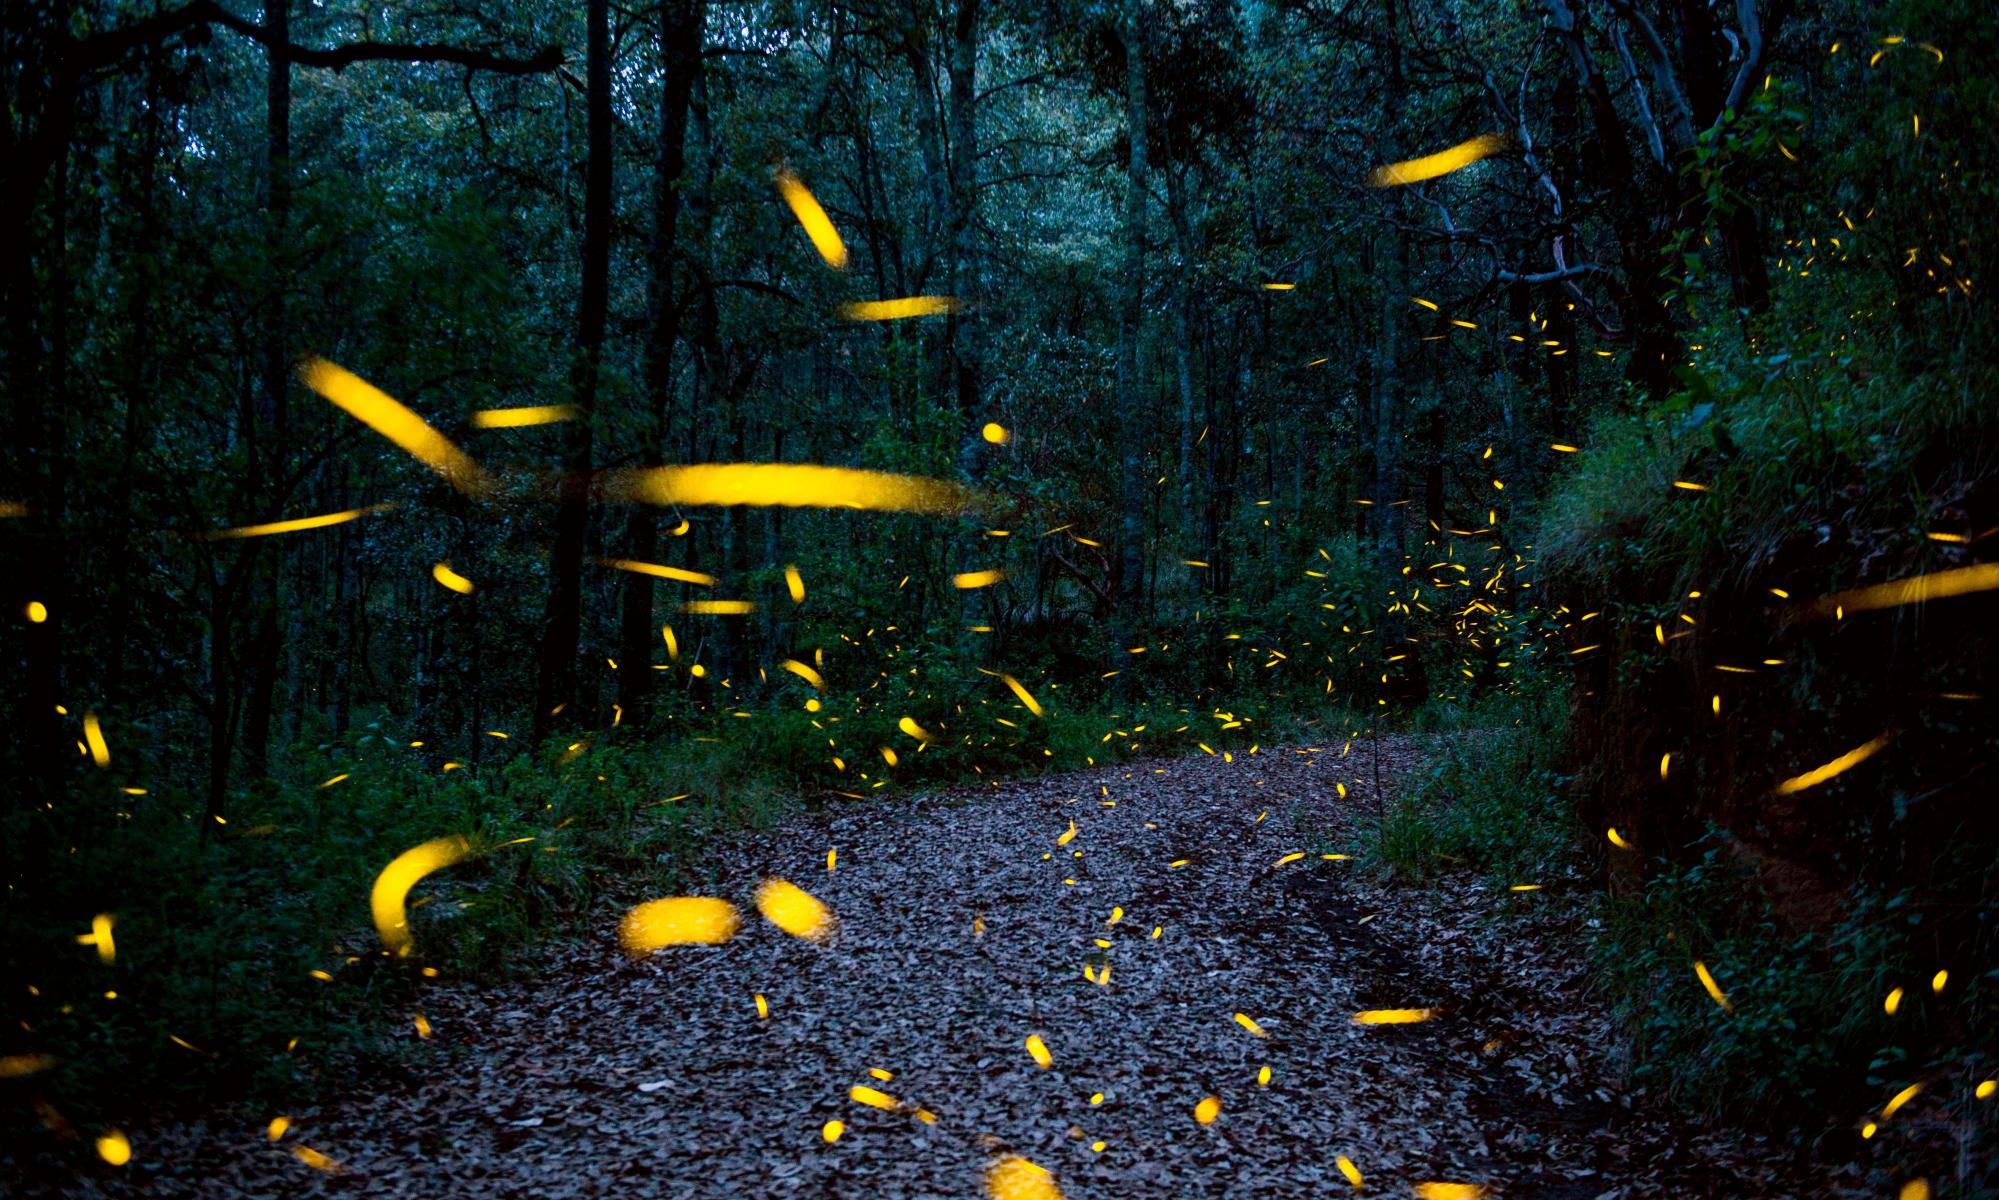 Fireflies under threat from habitat loss, pesticides and light pollution